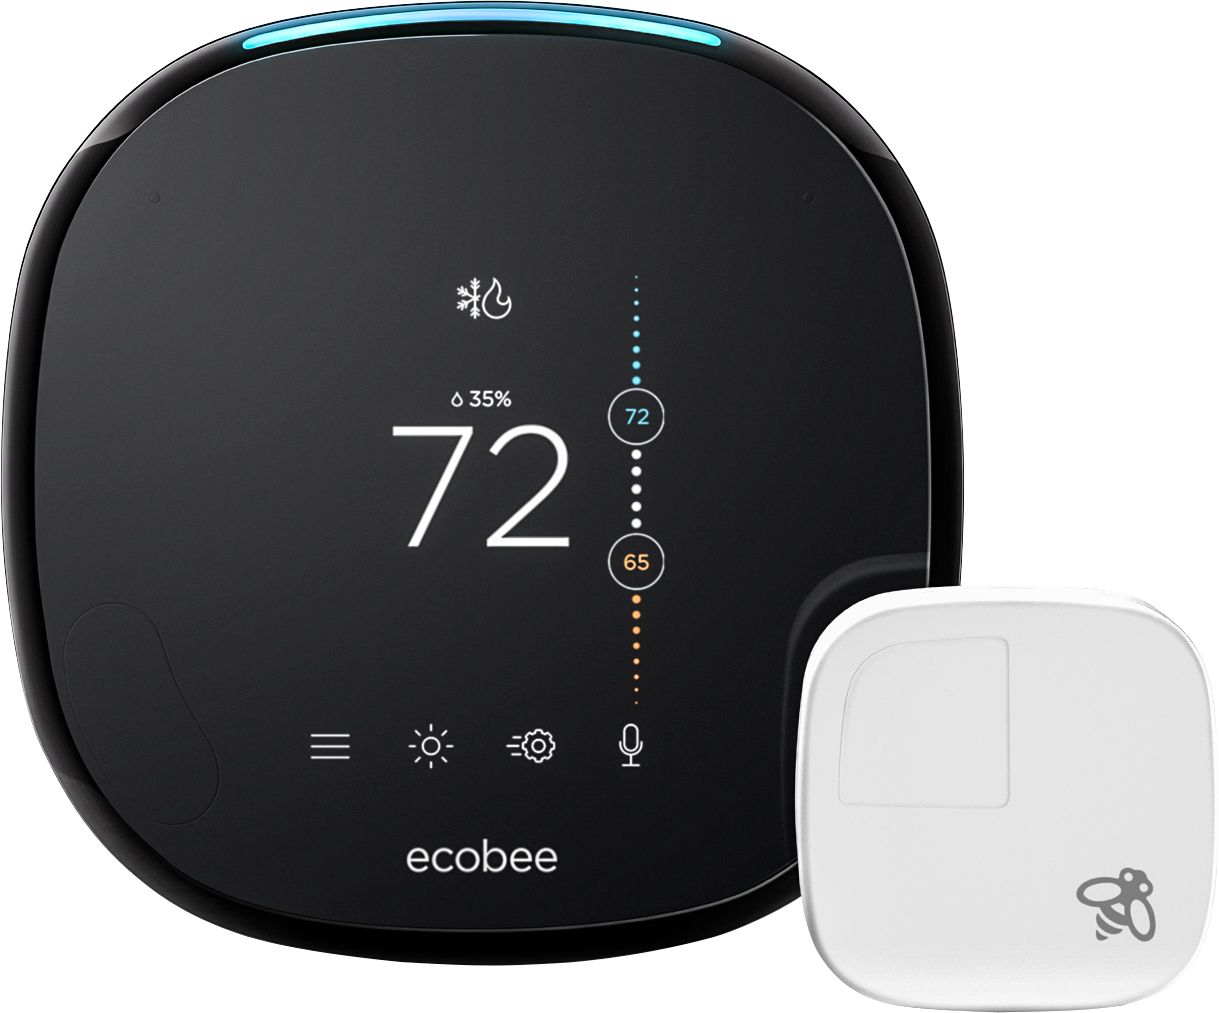 Best Buy: ecobee ecobee4 Wi-Fi Thermostat with Room Sensor and Built-In  Alexa Voice Service Black EB-STATE4-01